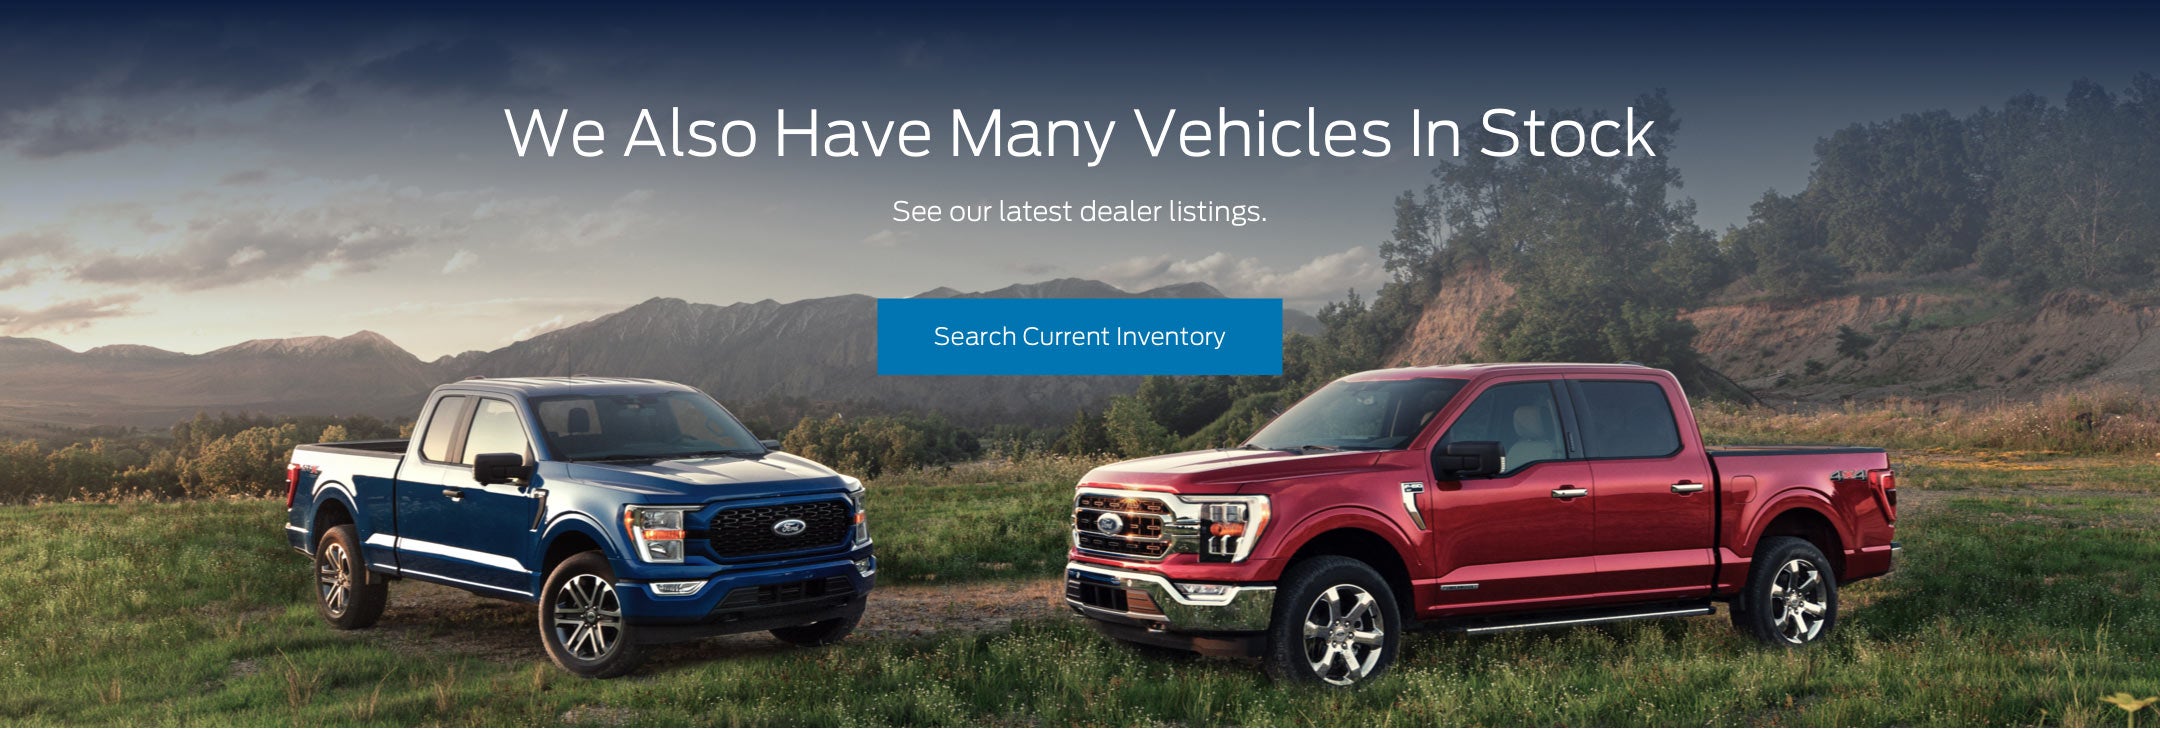 Ford vehicles in stock | Star Ford of Big Spring in Big Spring TX